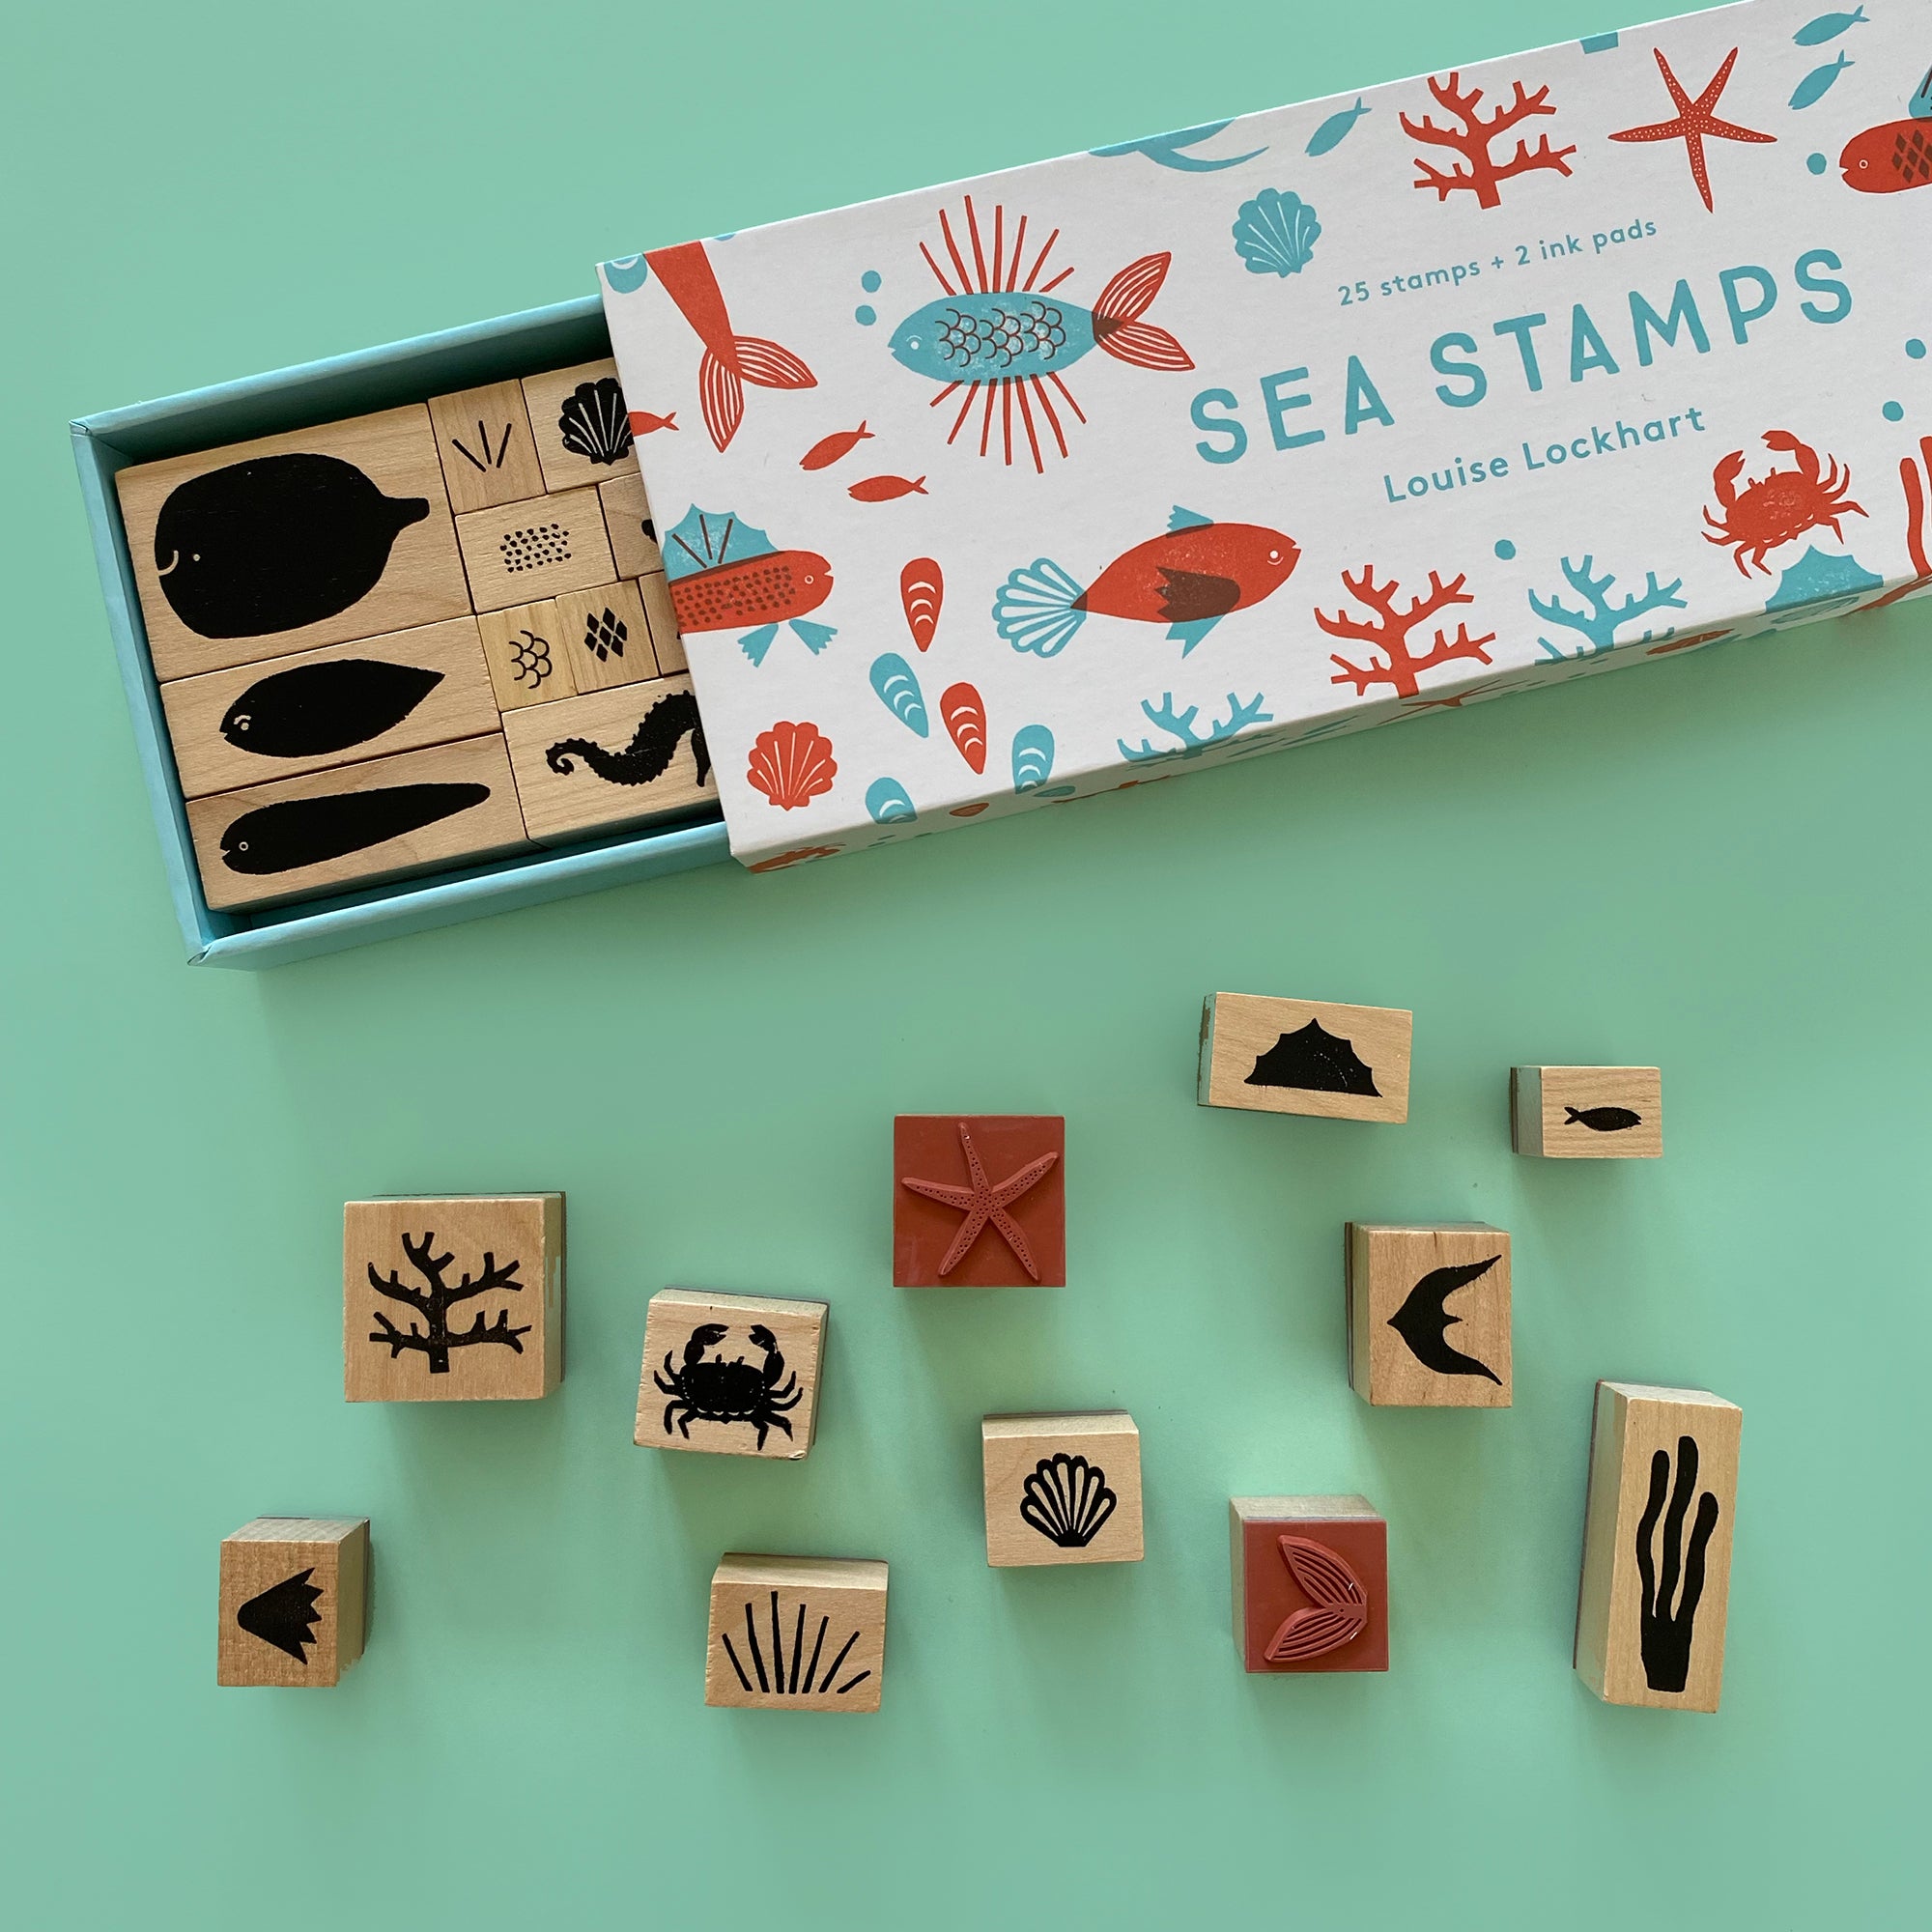 SEA STAMPS